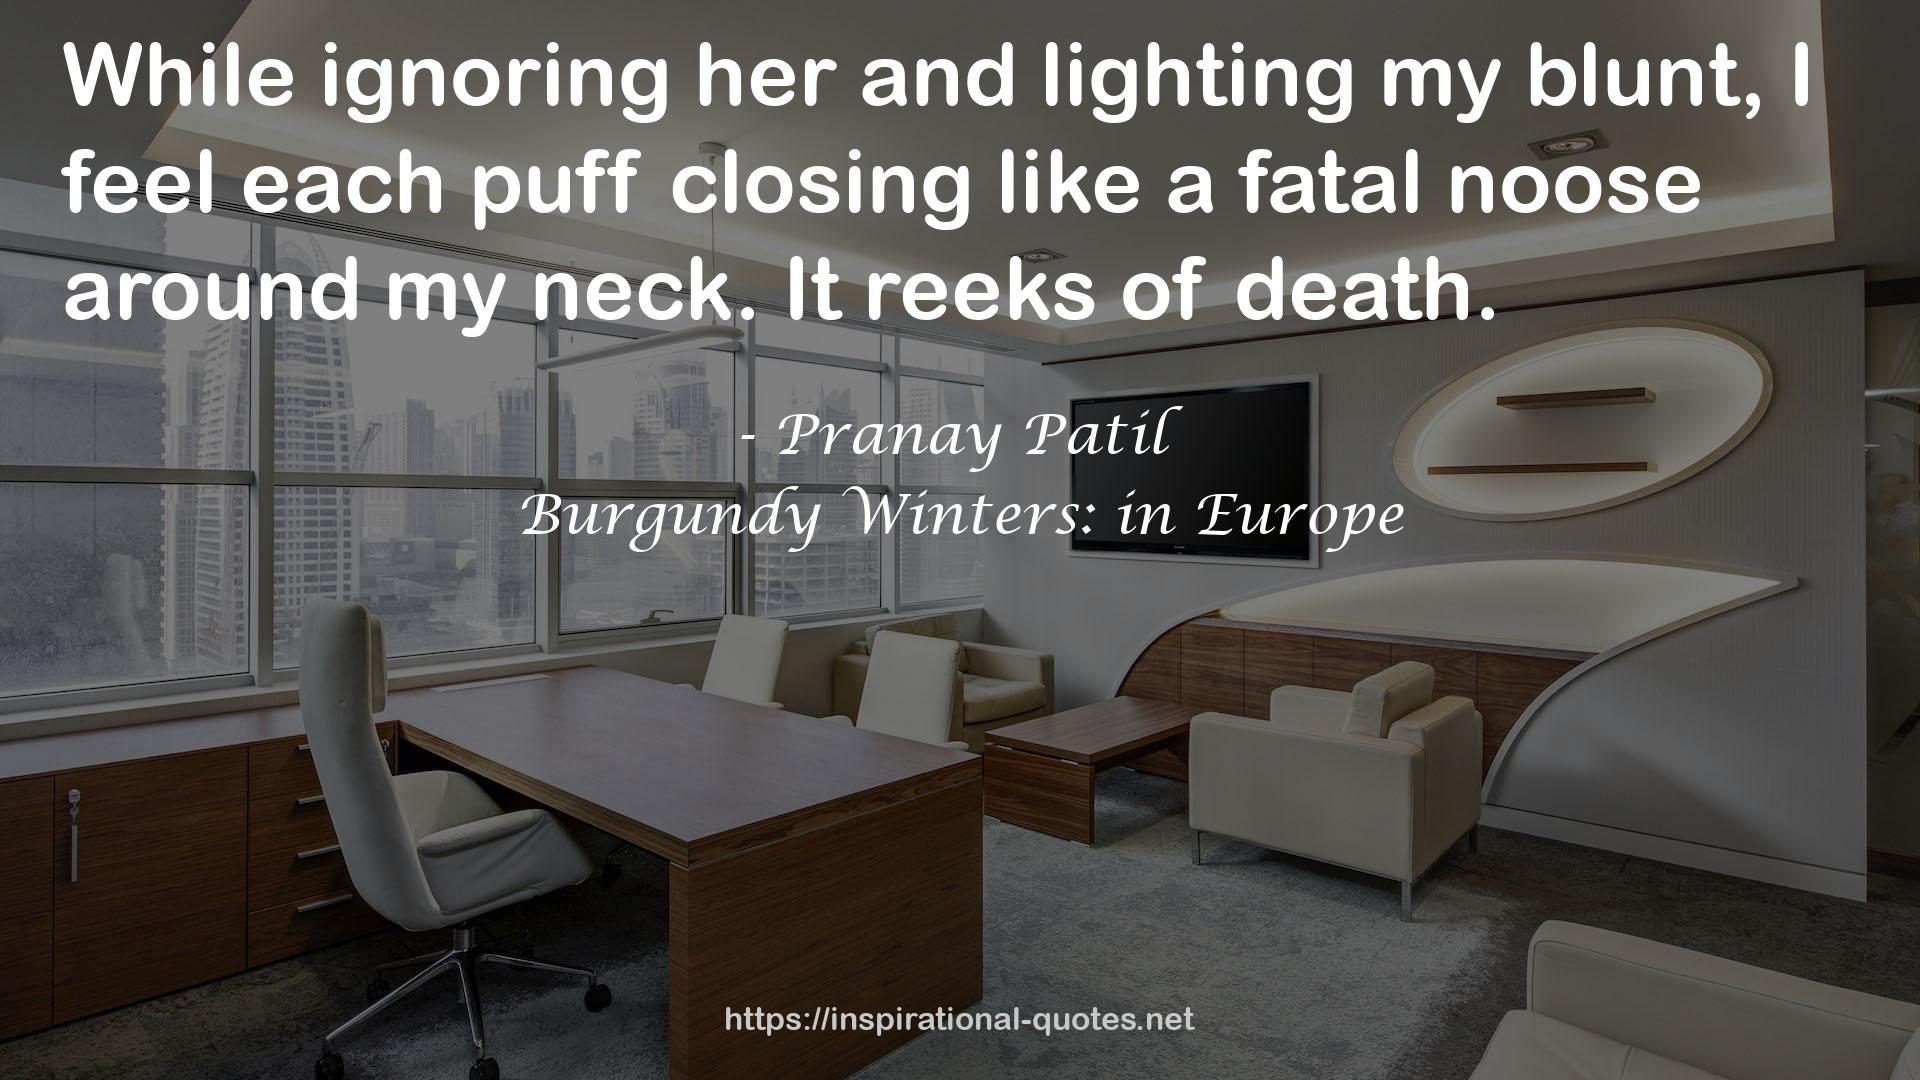 Burgundy Winters: in Europe QUOTES